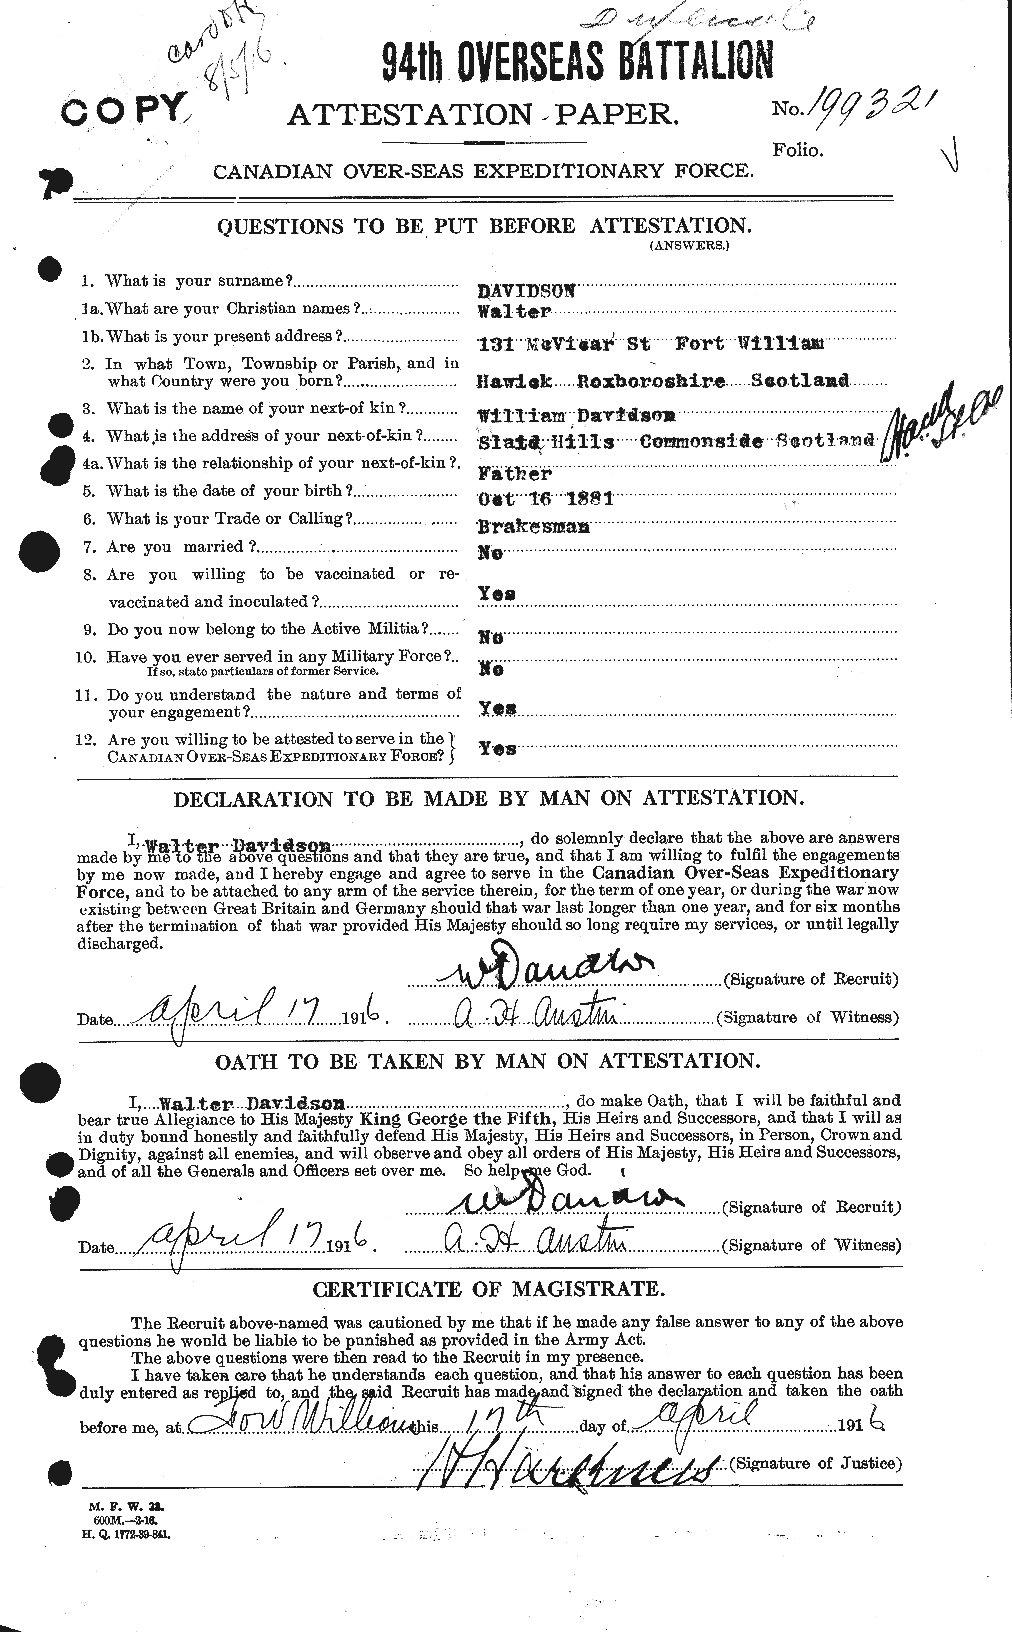 Personnel Records of the First World War - CEF 278710a